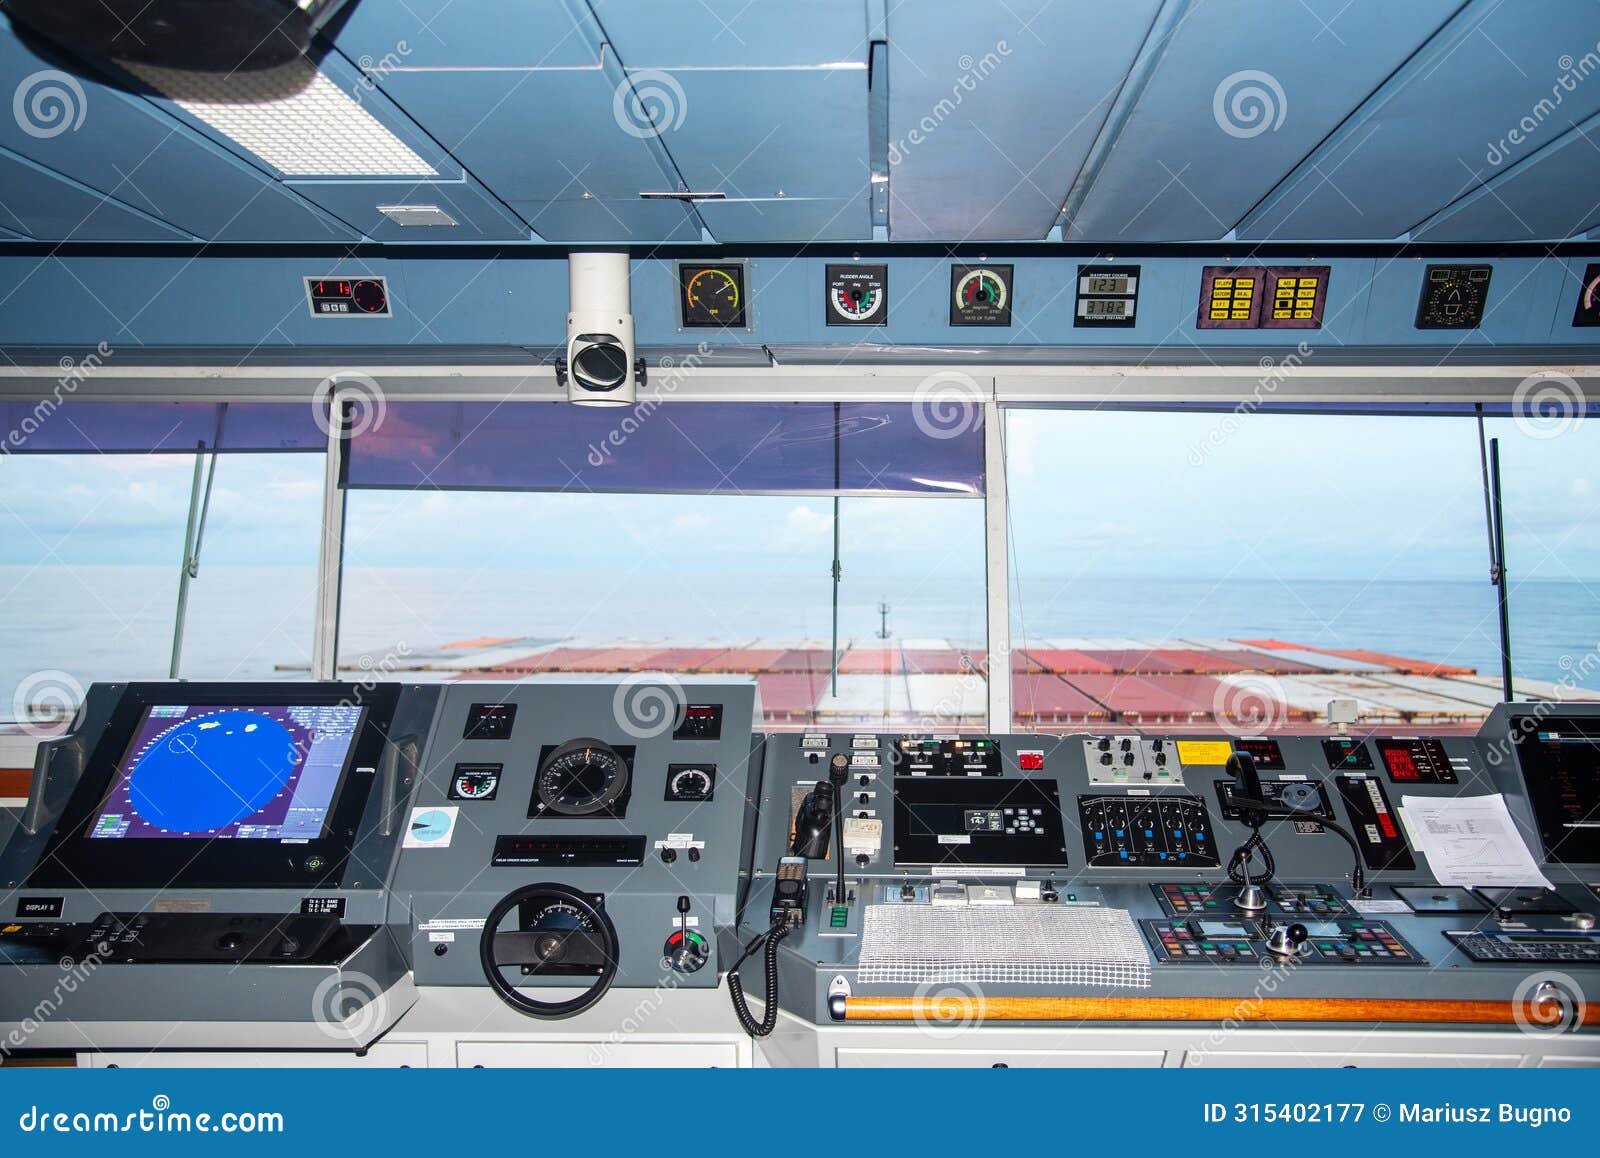 control console on the navigational bridge of the cargo container ship.